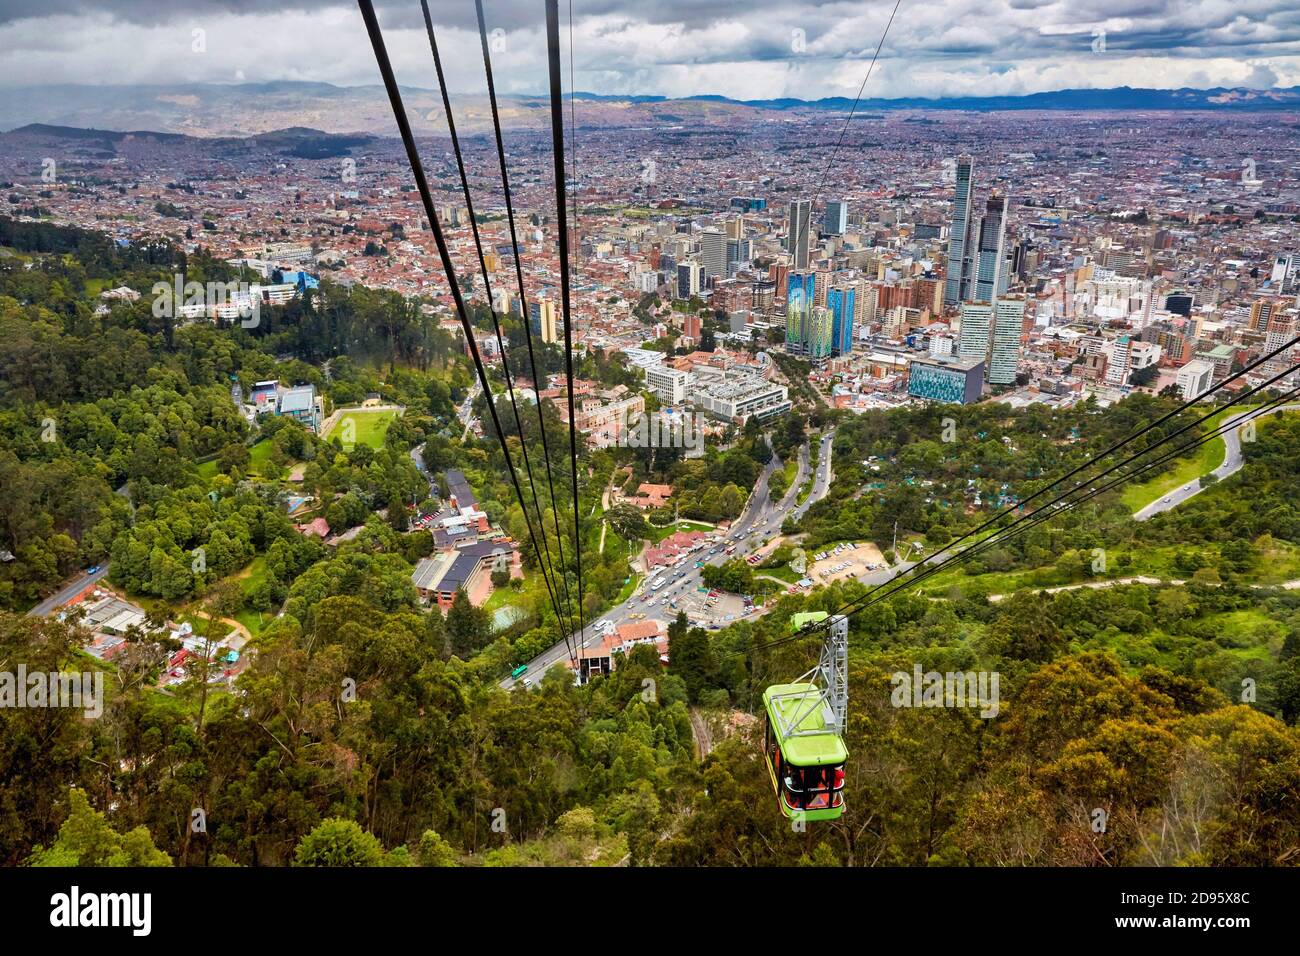 Metro cable, City Views, Monserrate hill, Cundinamarca, Colombia, South America Stock Photo